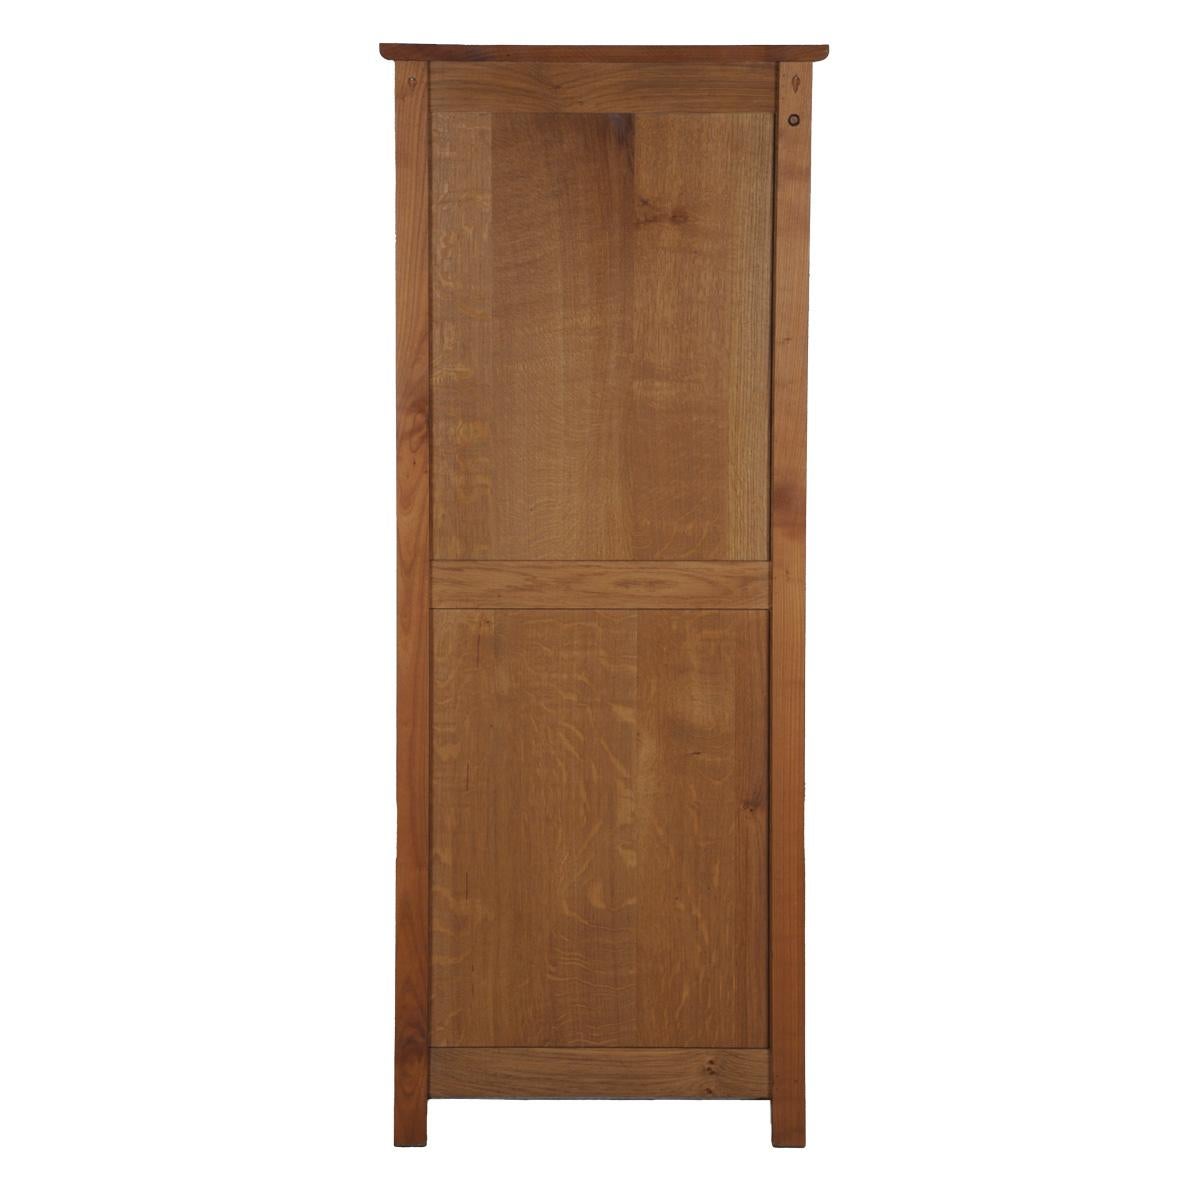 Lacquered French Armoirette Cabinet with 1 folding Door in solid stained cherry wood For Sale